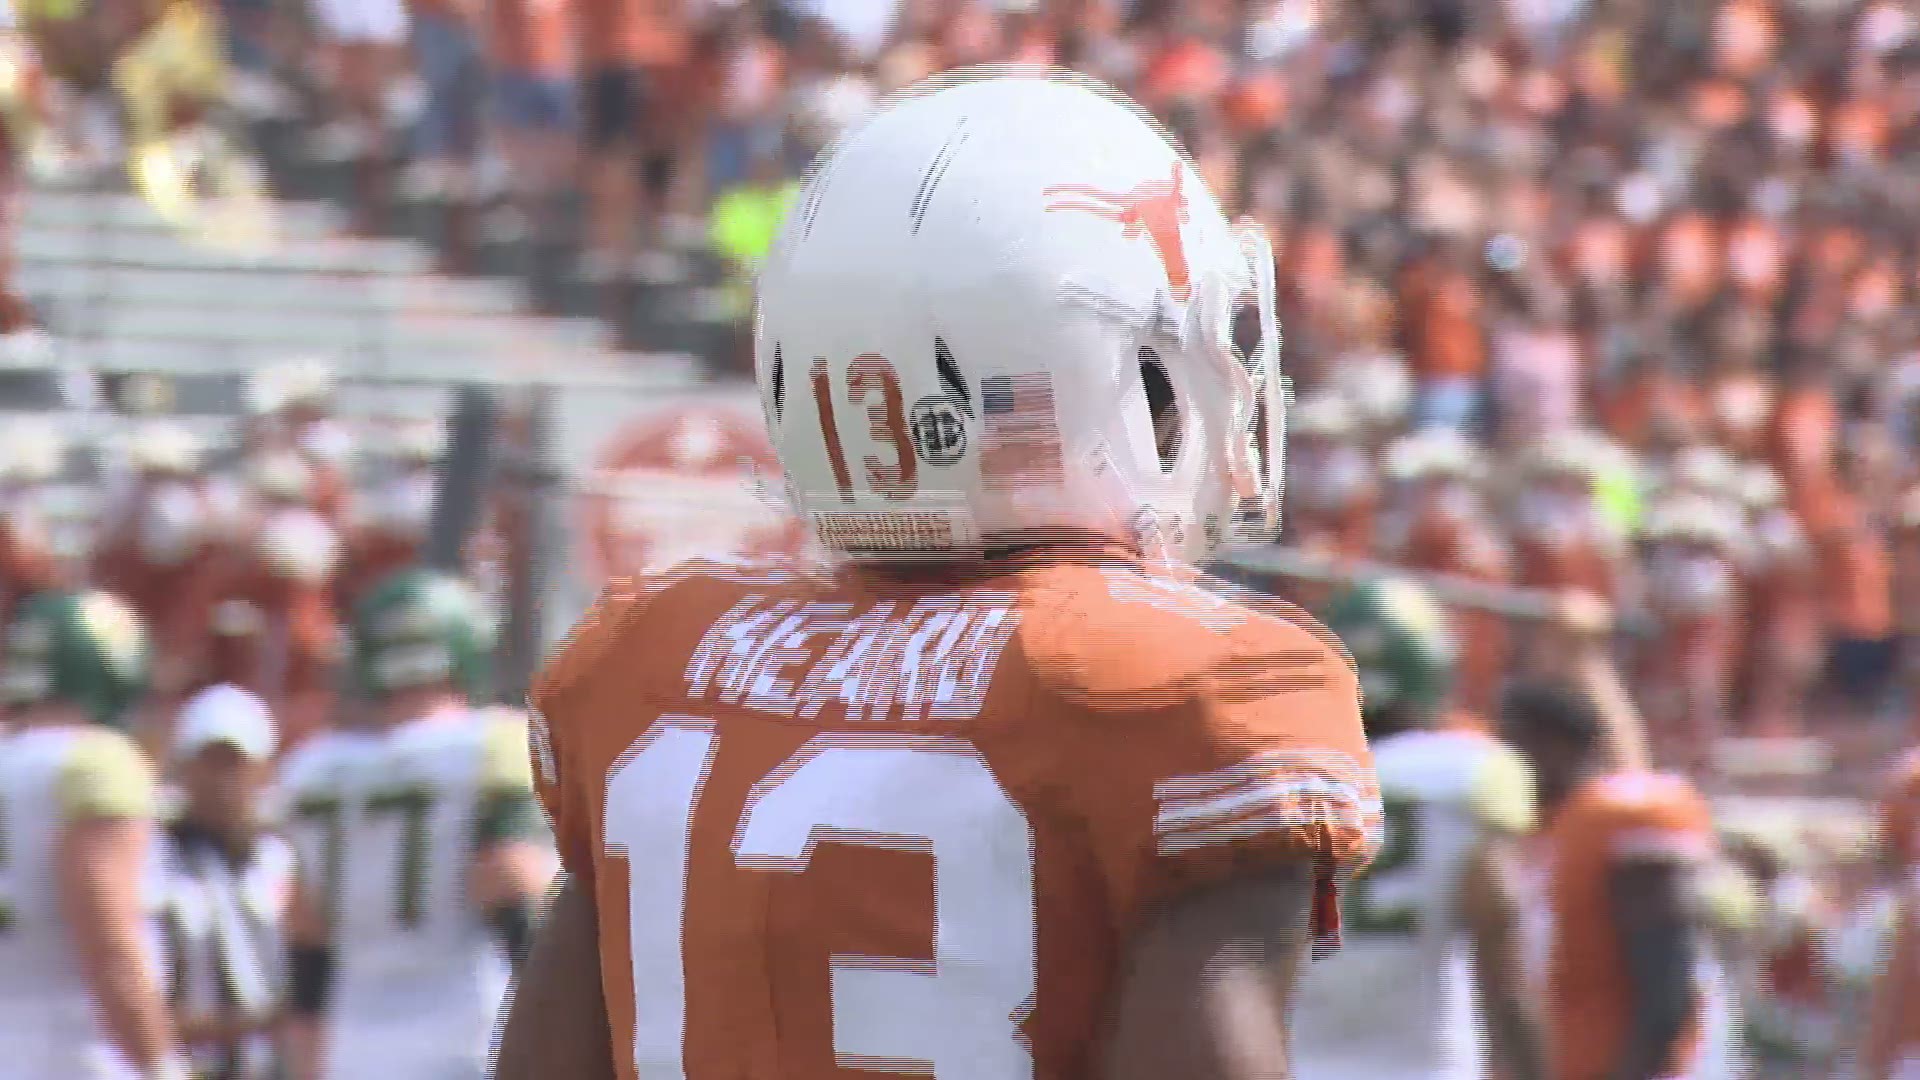 The Longhorns 5th year senior has experienced a couple of coaches and position changes on offense. Heard will play his final game in Austin on Saturday.